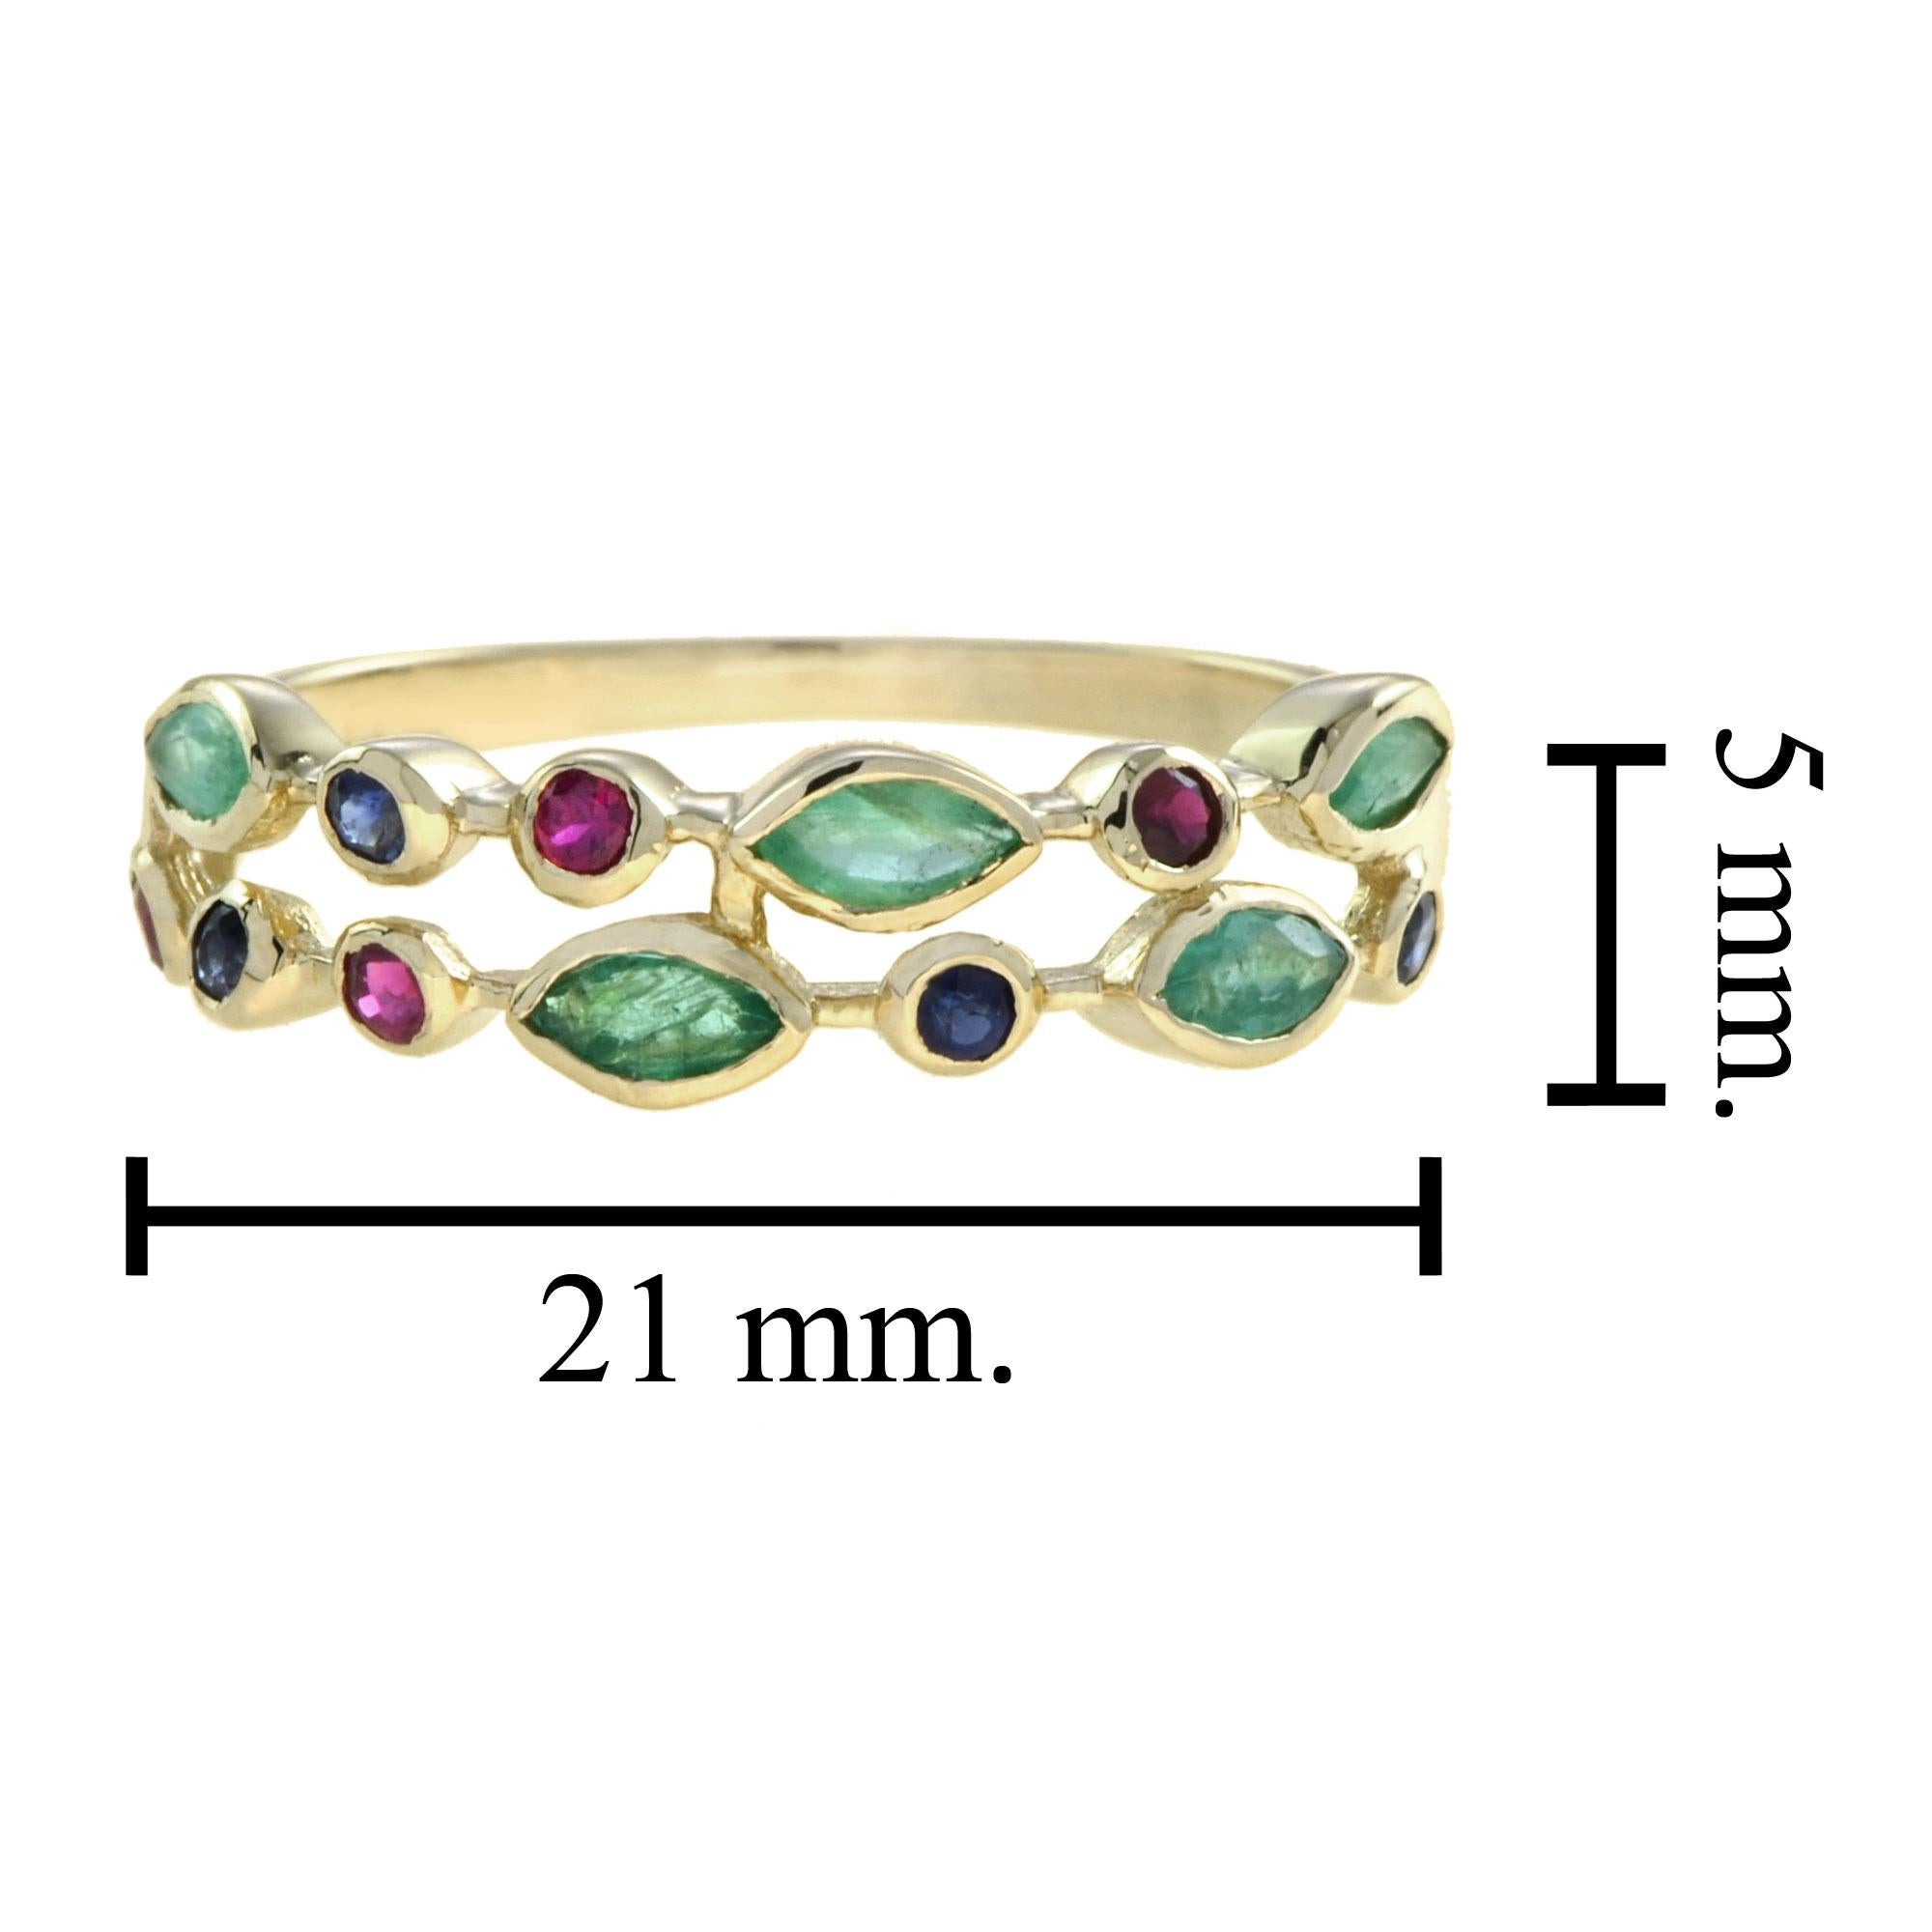 For Sale:  Double Row Emerald, Ruby and Sapphire Eternity Ring in 14K Yellow Gold 8